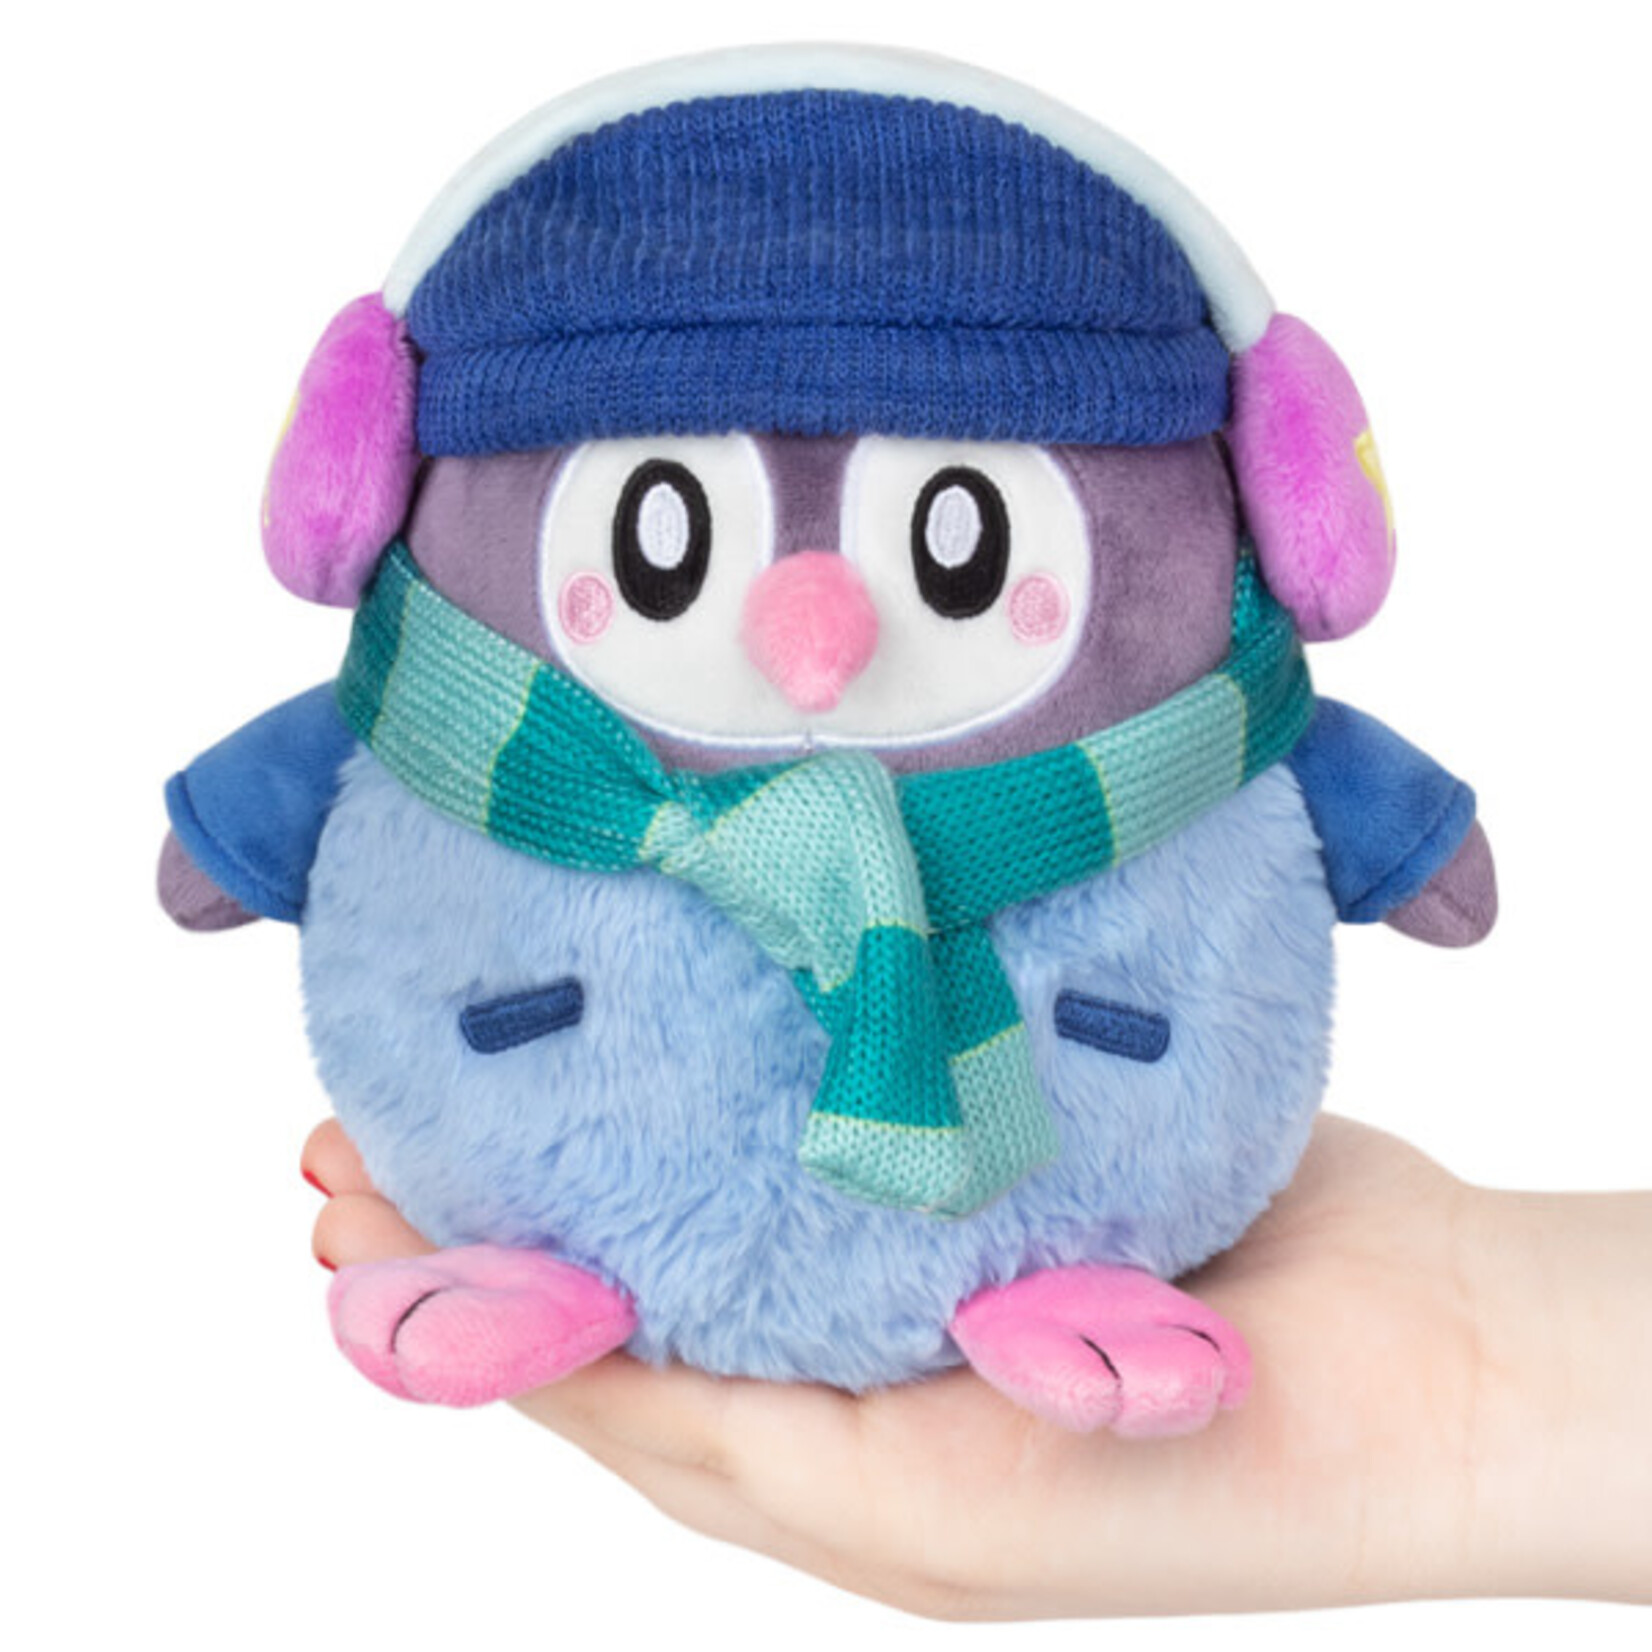 Squishable Squishable Alter Ego Chilly Penguin